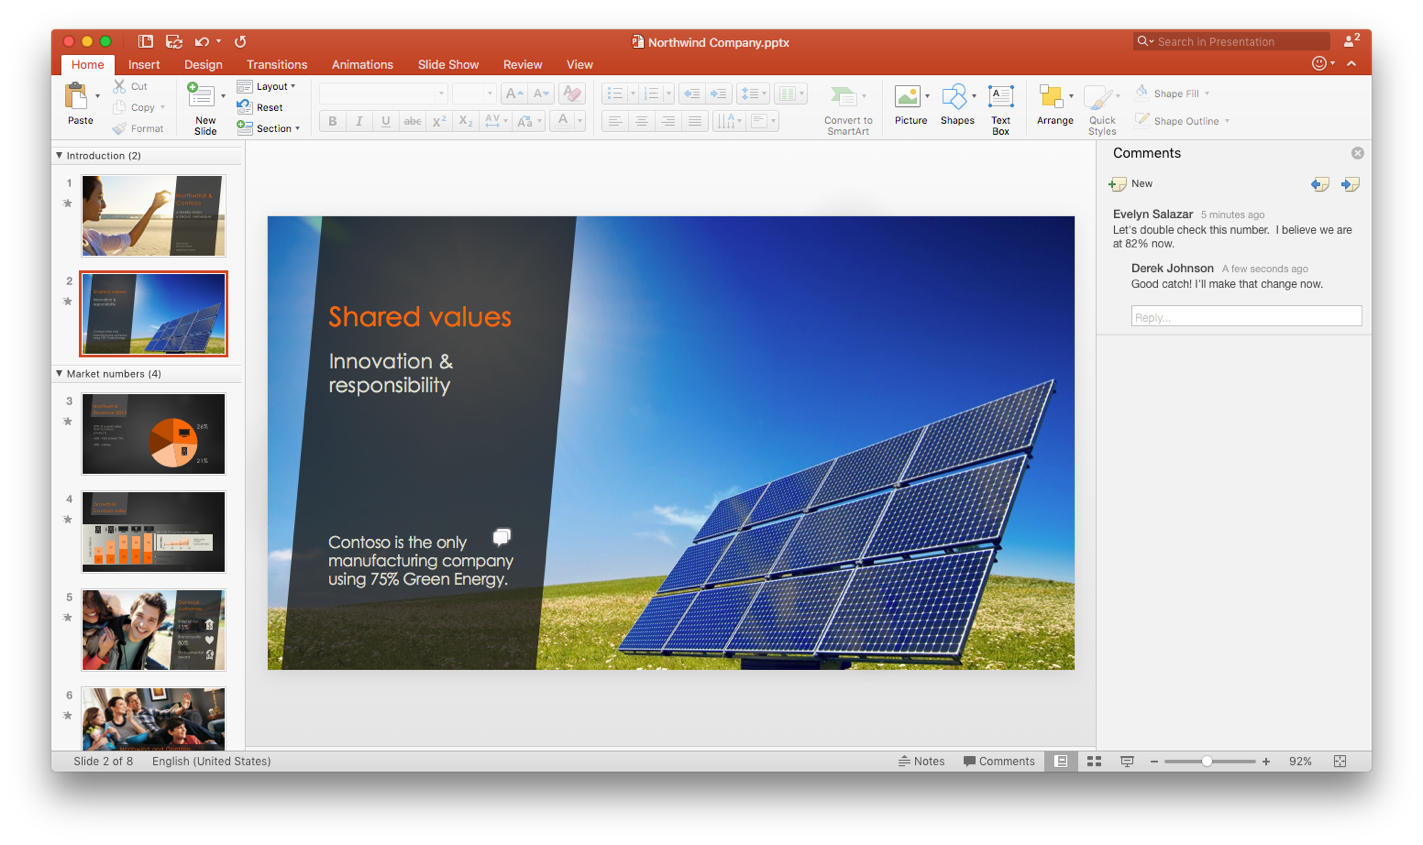 how to apply layout in powerpoint for mac